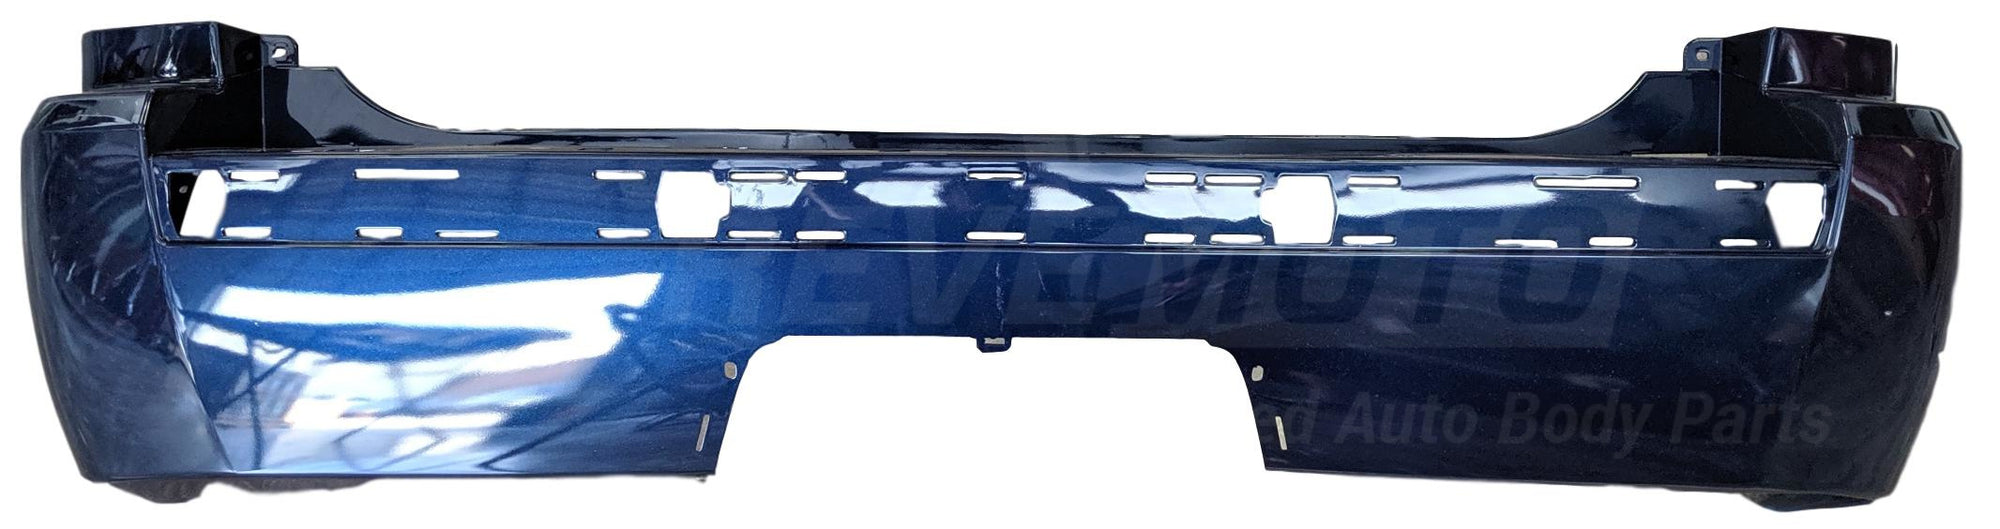 2006 Jeep Grand Cherokee : Rear Bumper Painted